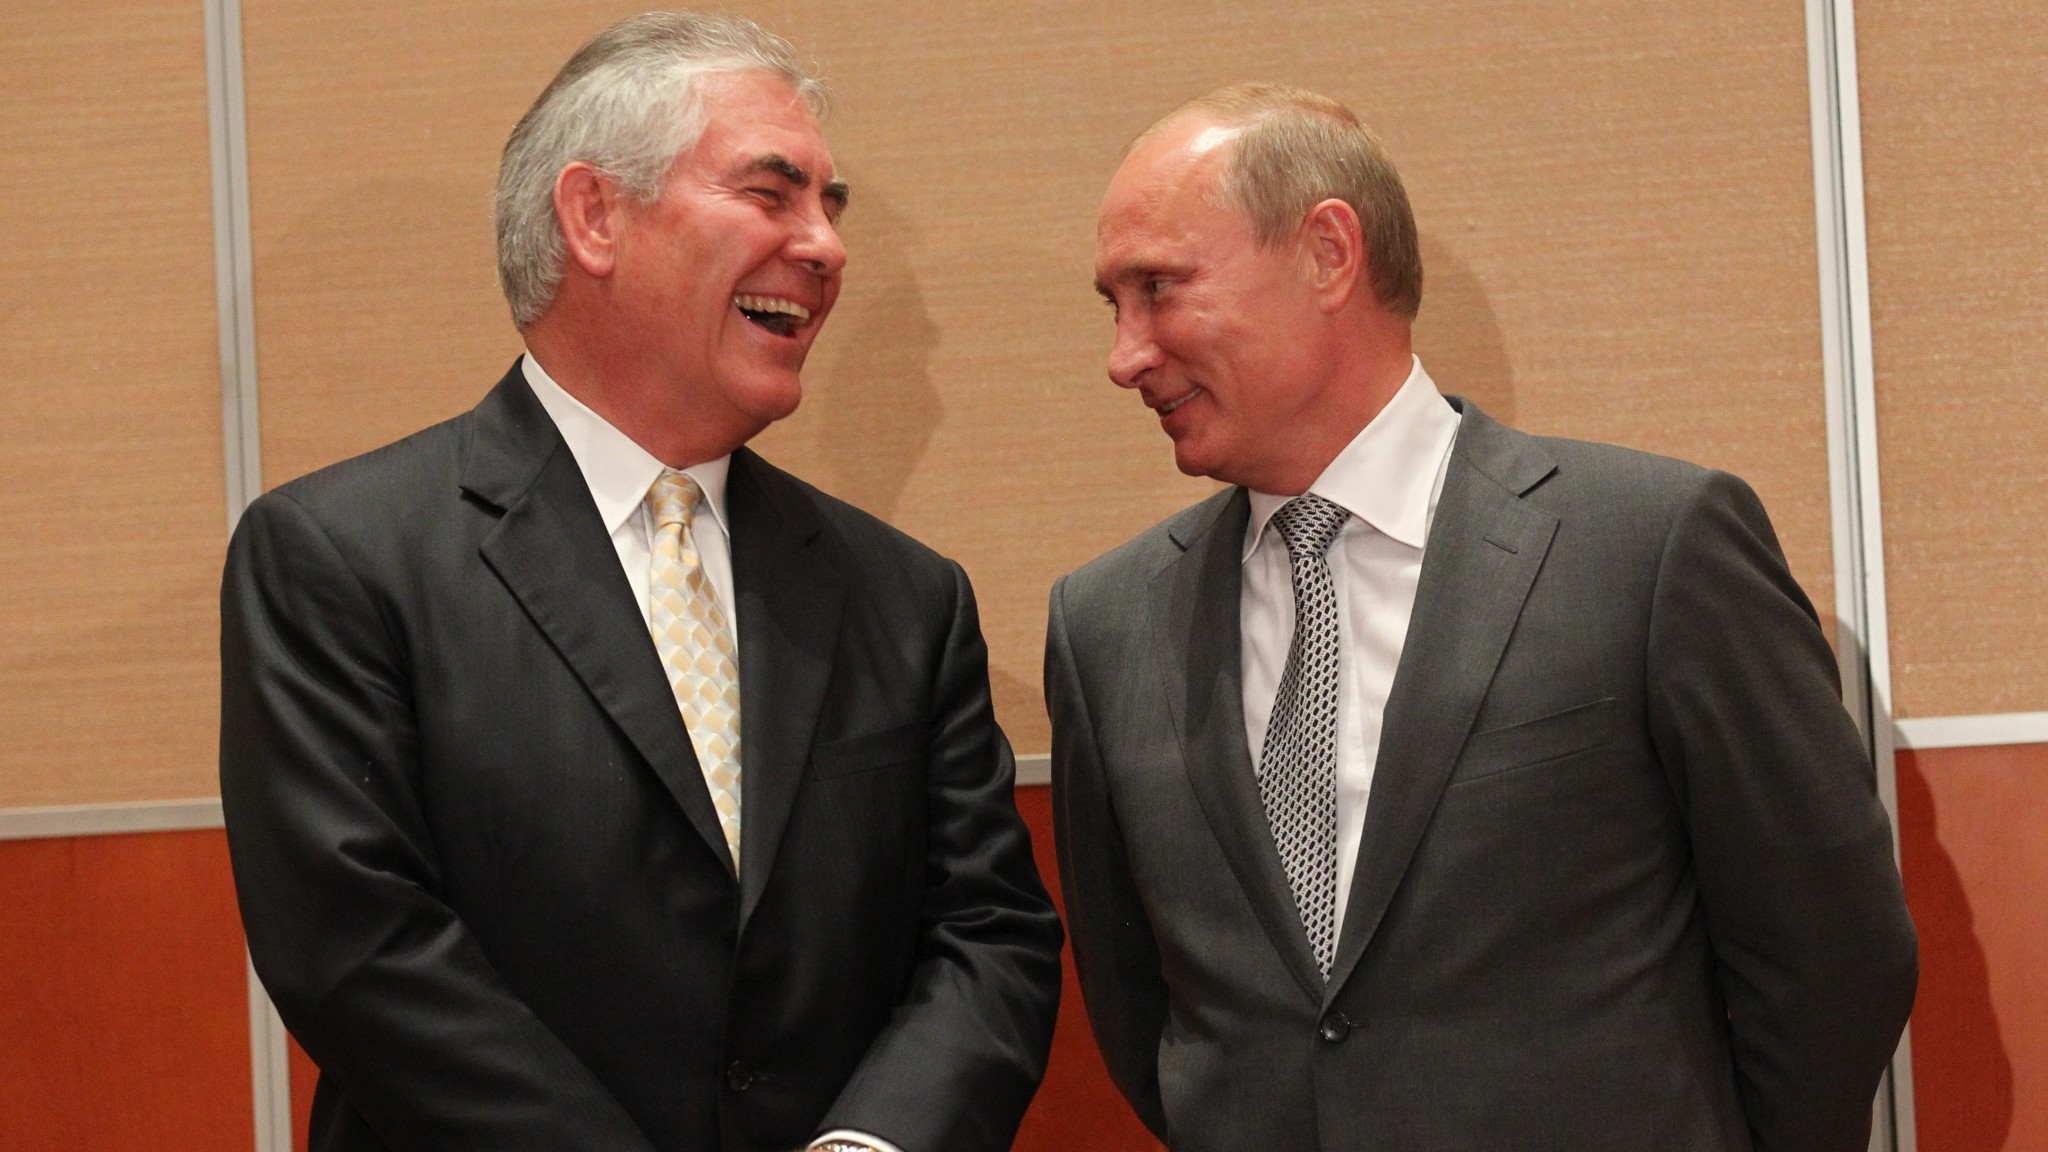 russian-leader-vladimir-putin-and-exxon-mobile-ceo-and-chairman-rex-tillerson-during-a-signing-ceremony-for-an-arctic-oil-exploration-deal-between-exxon-m1.jpg